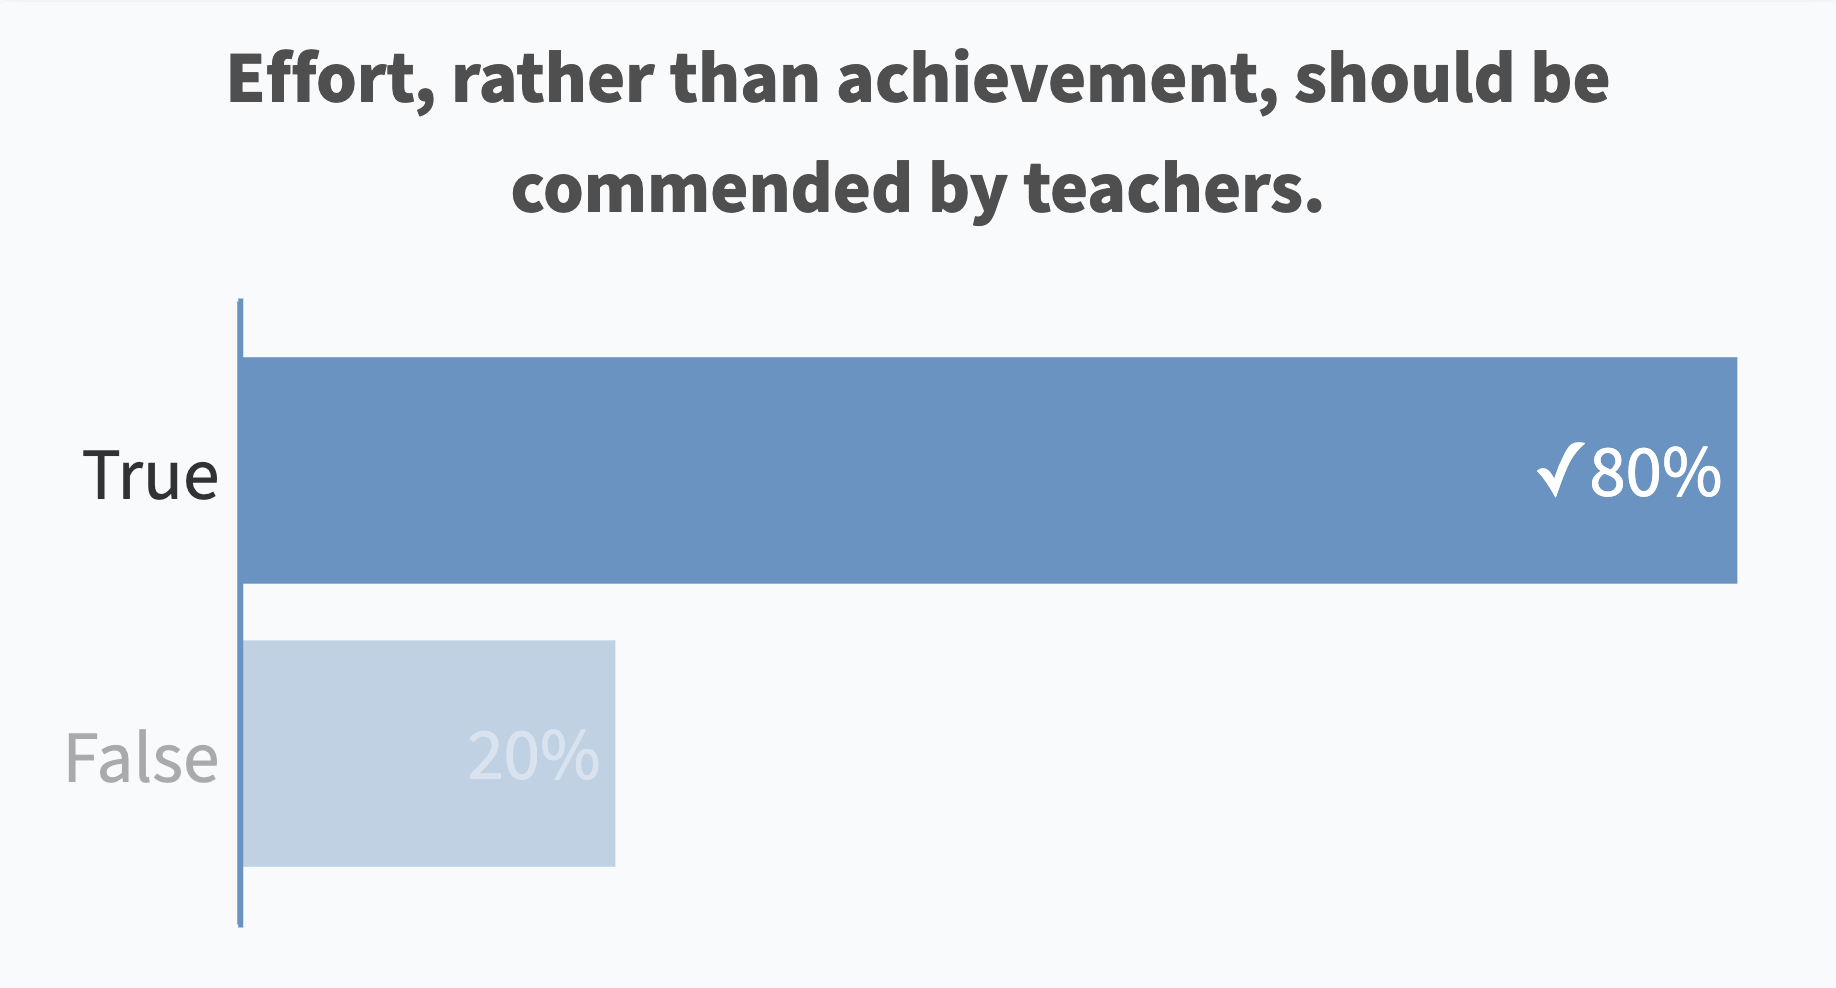 Effort, rather than achievement, should be commended by teachers.